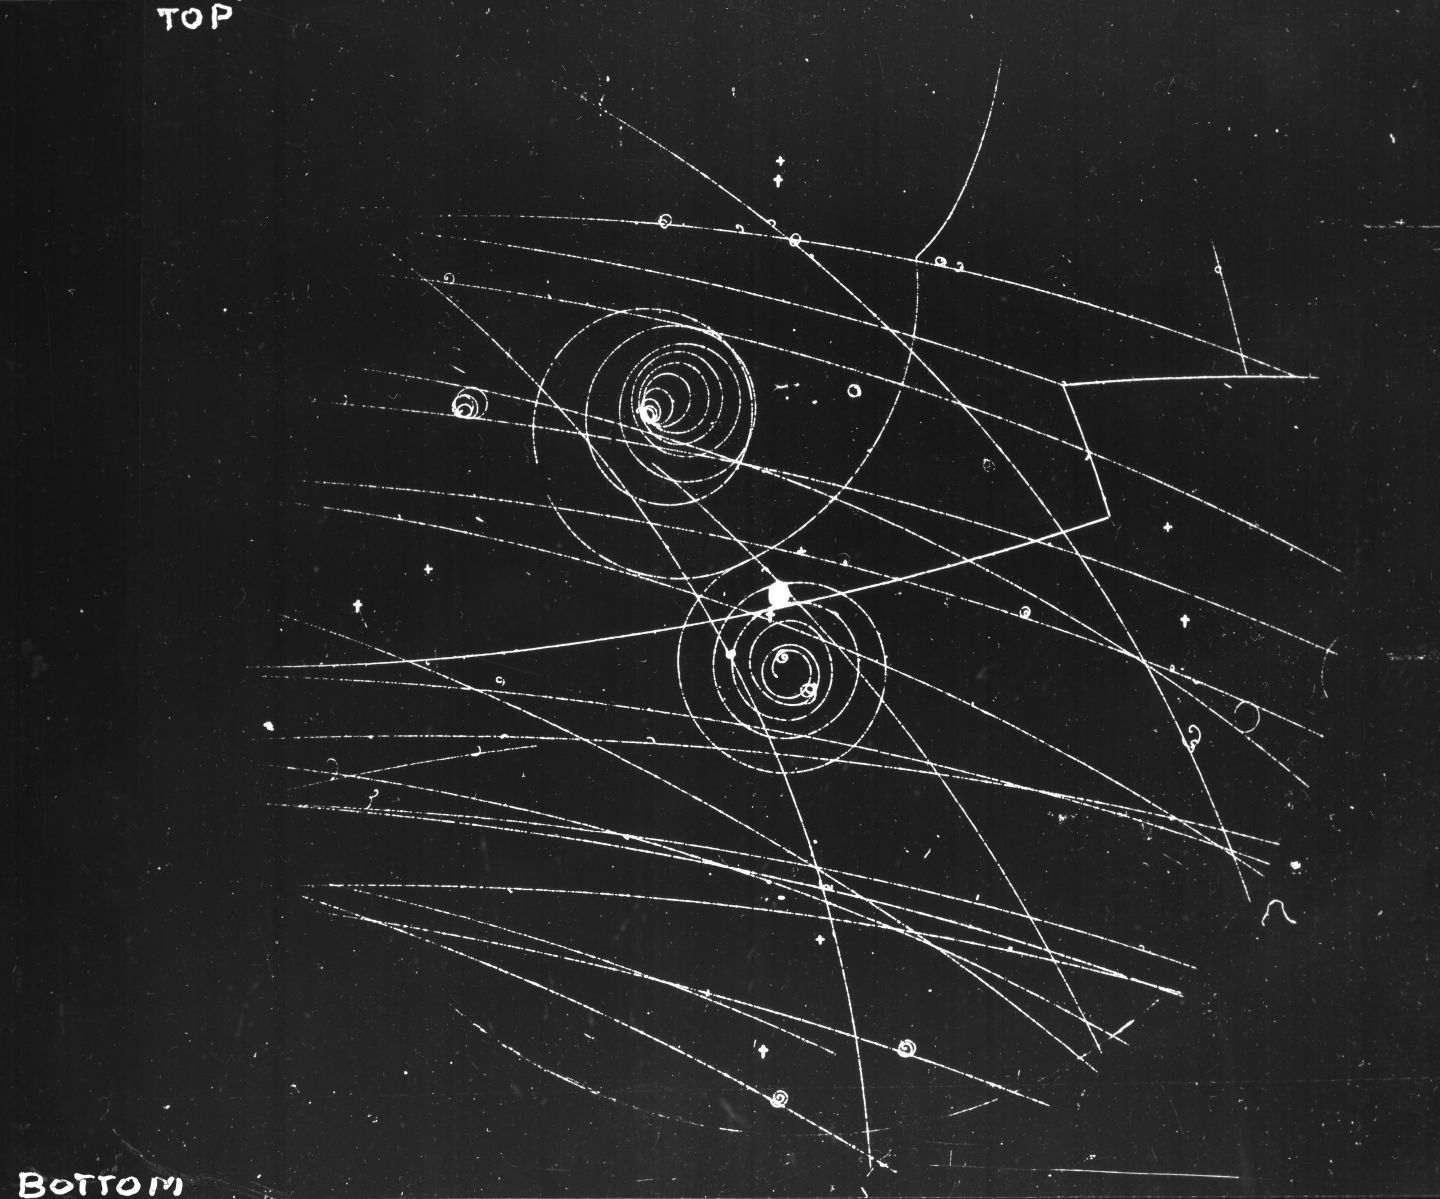 Bubble chamber photo from 1961 